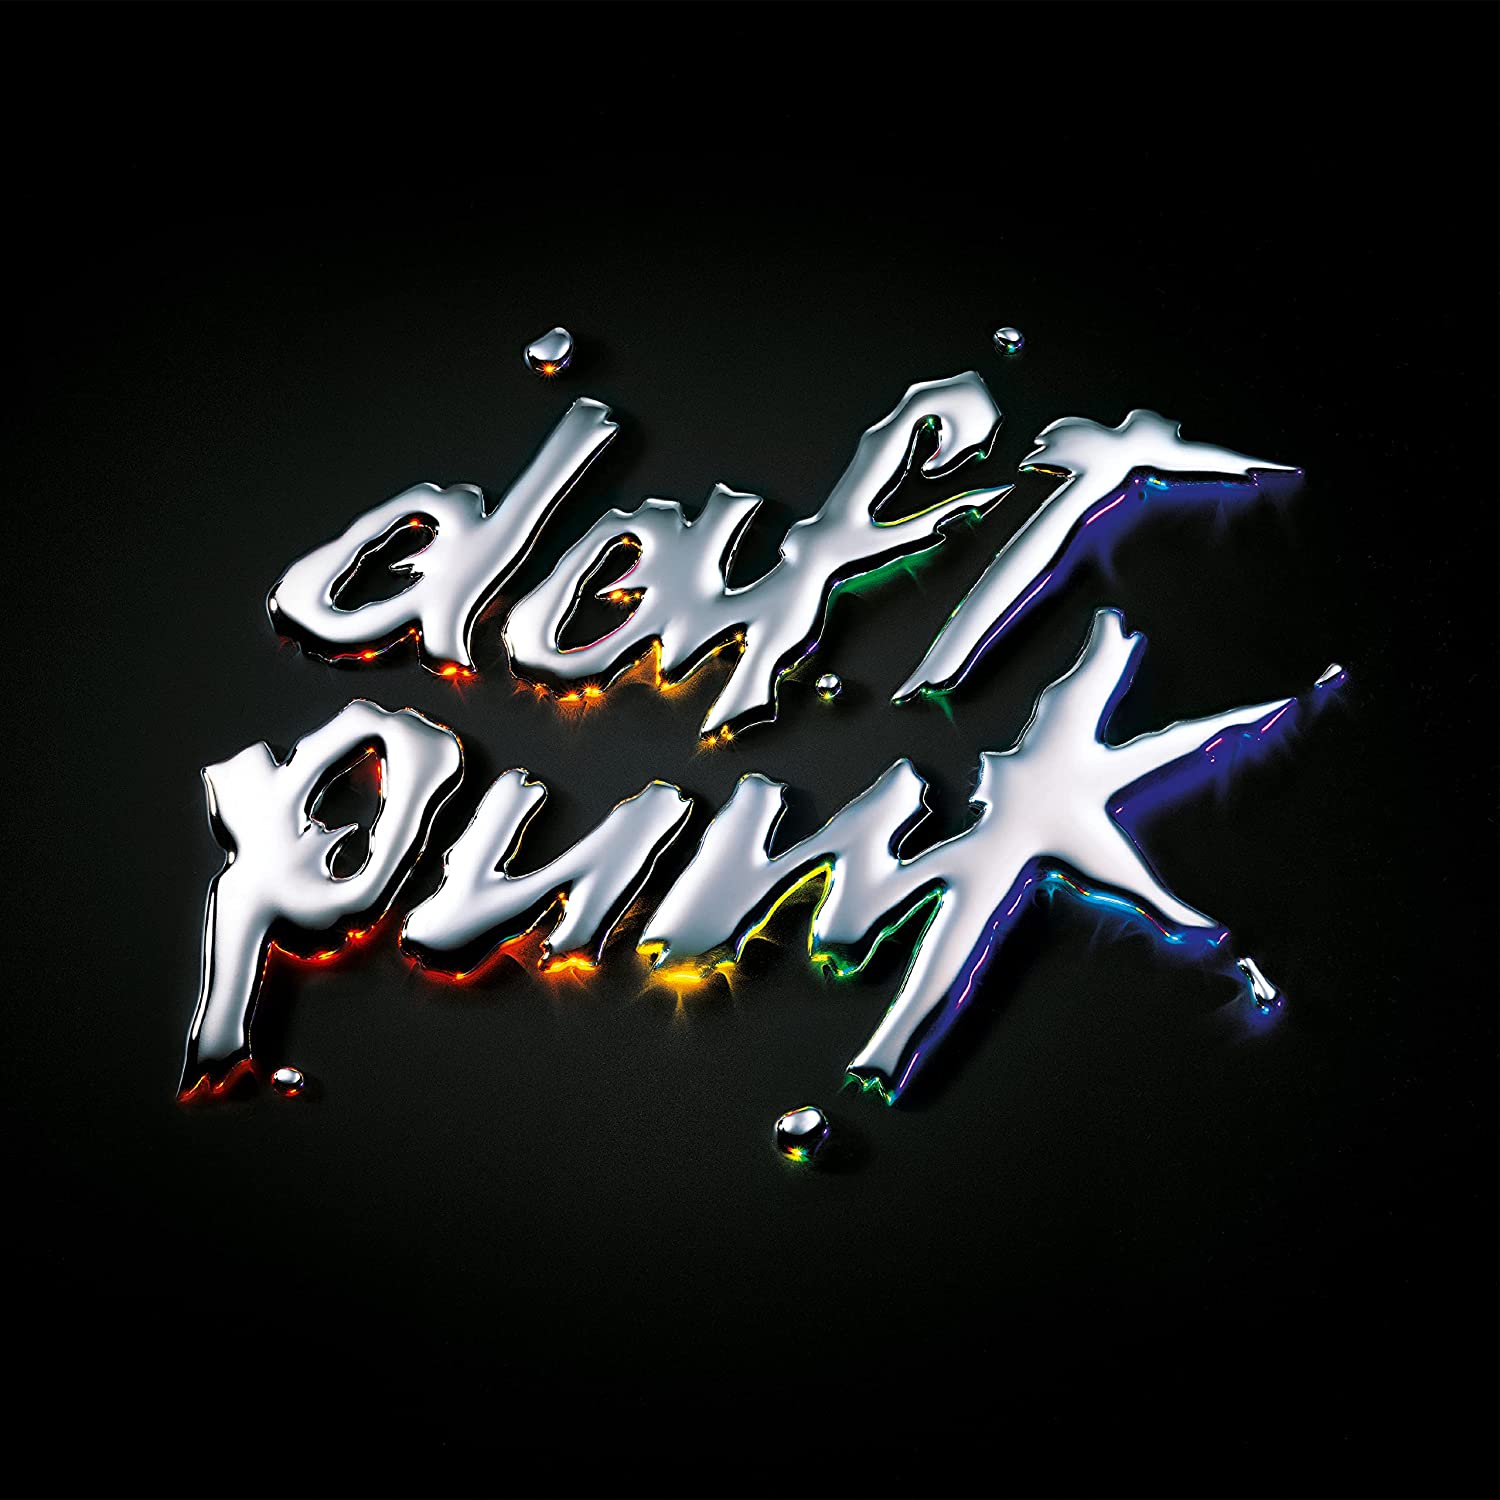 Album cover for Daft Punk's Discovery